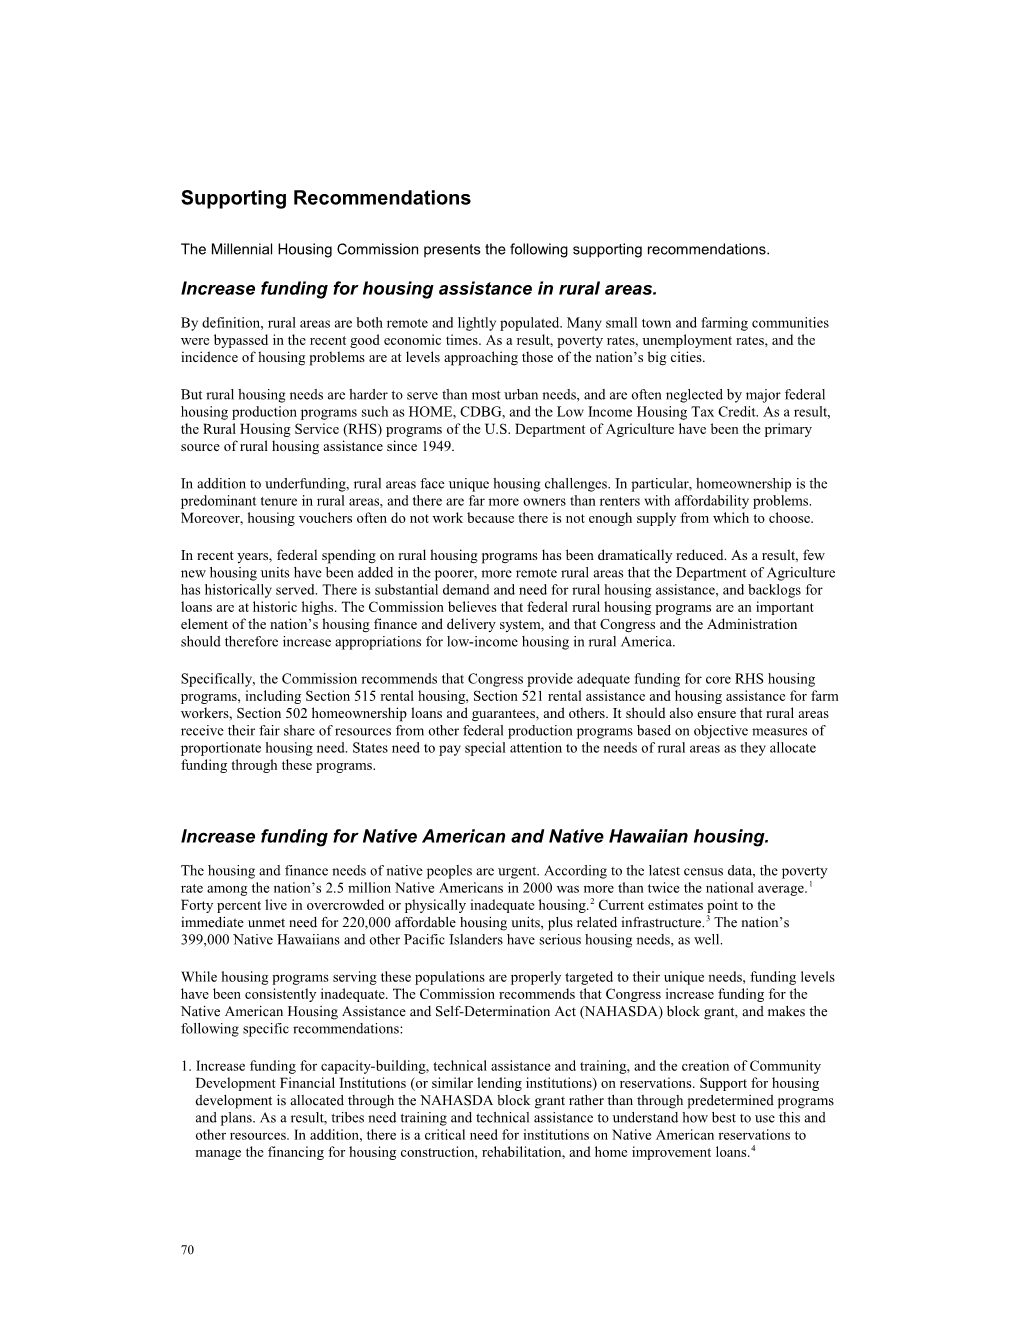 Principal Recommendations to Congress: a Framework for Change